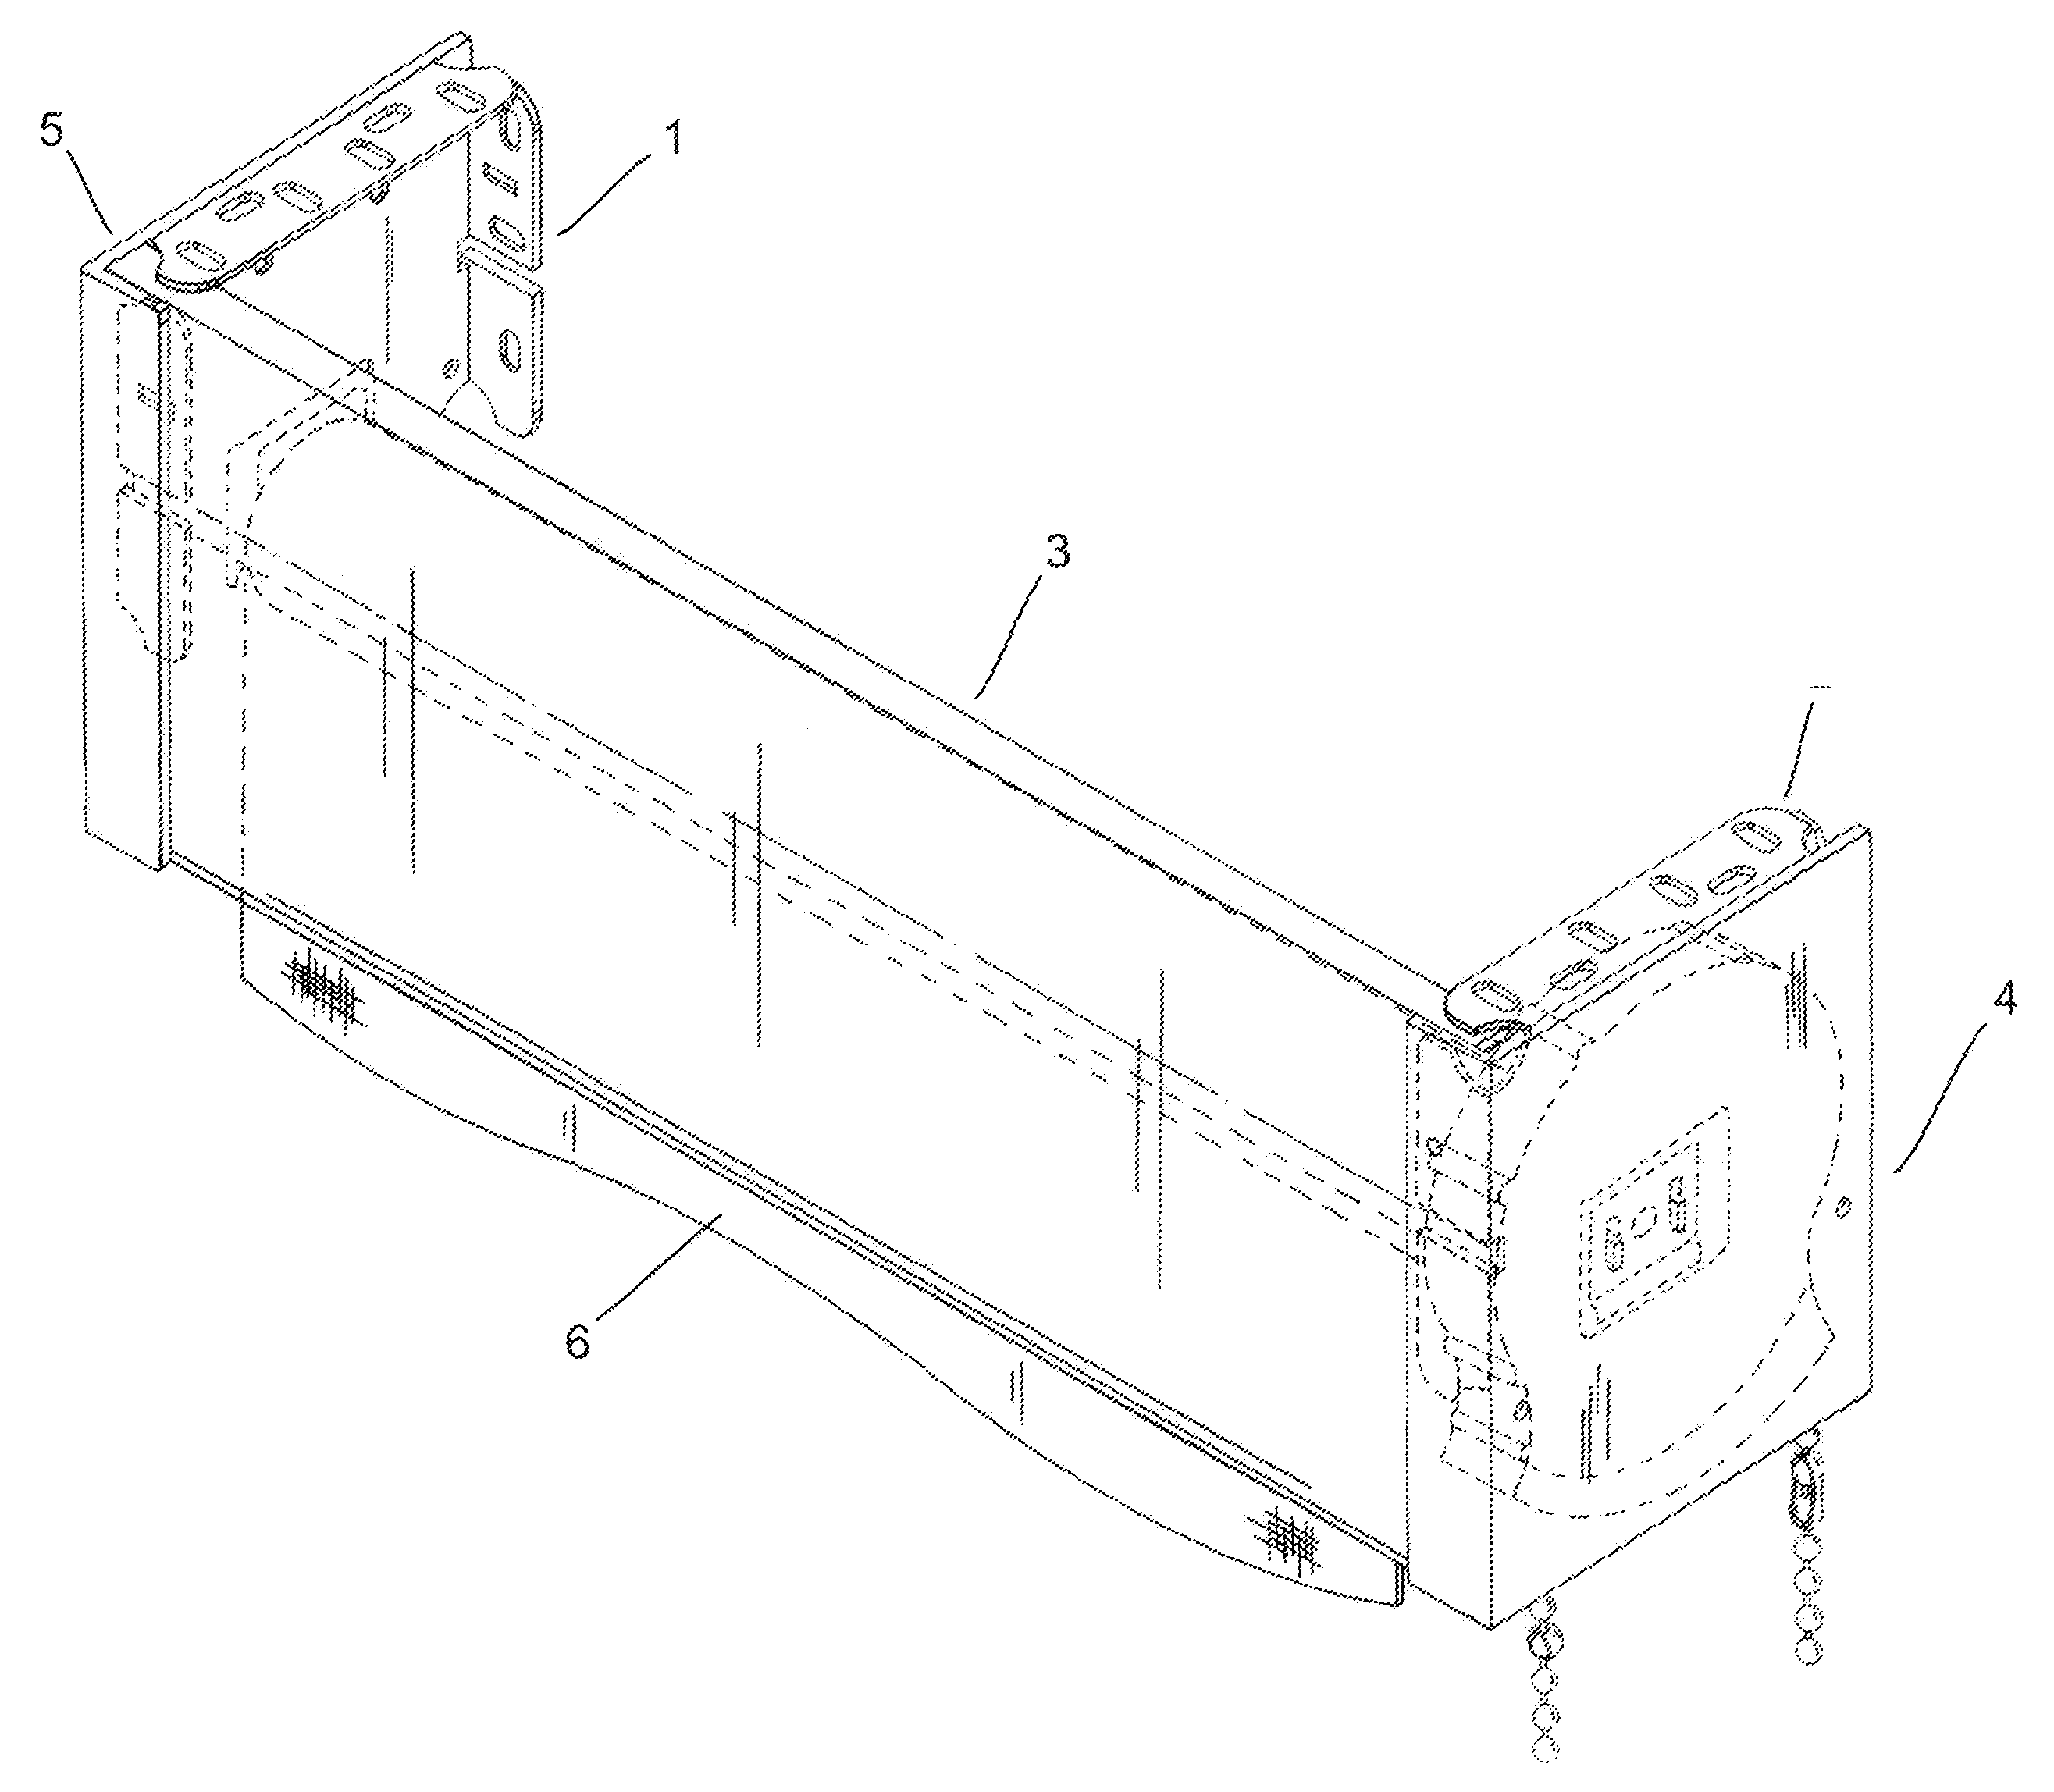 Roller curtain fixing bracket assembly